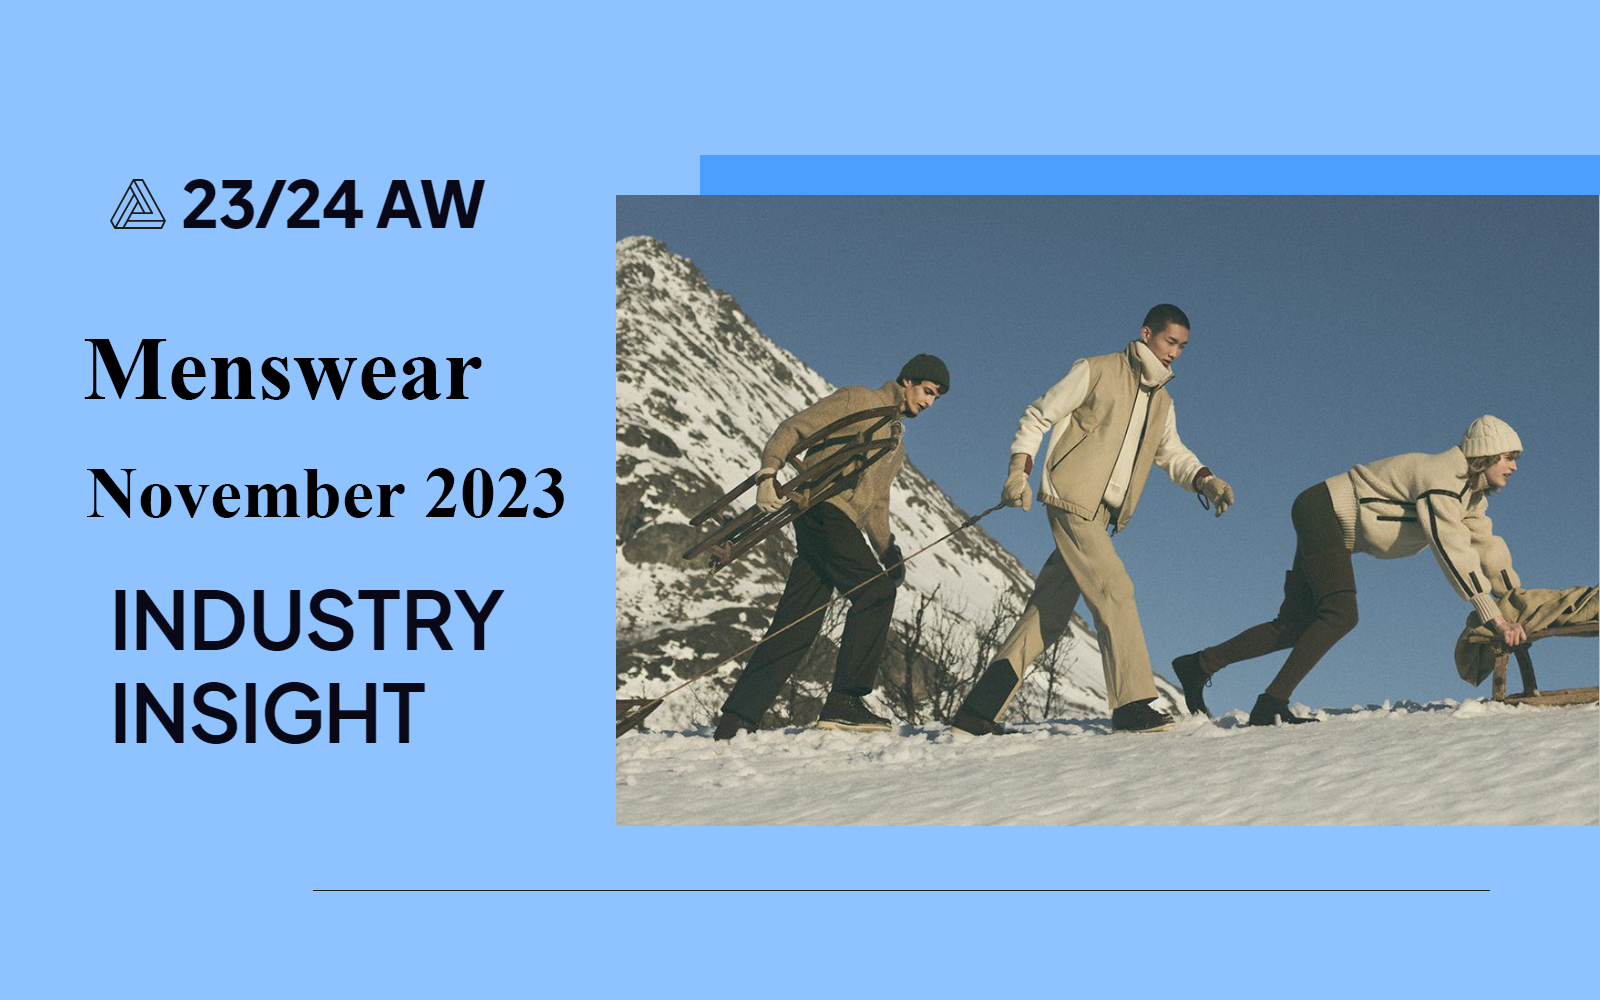 November 2023 - The Industry Insight of Menswear